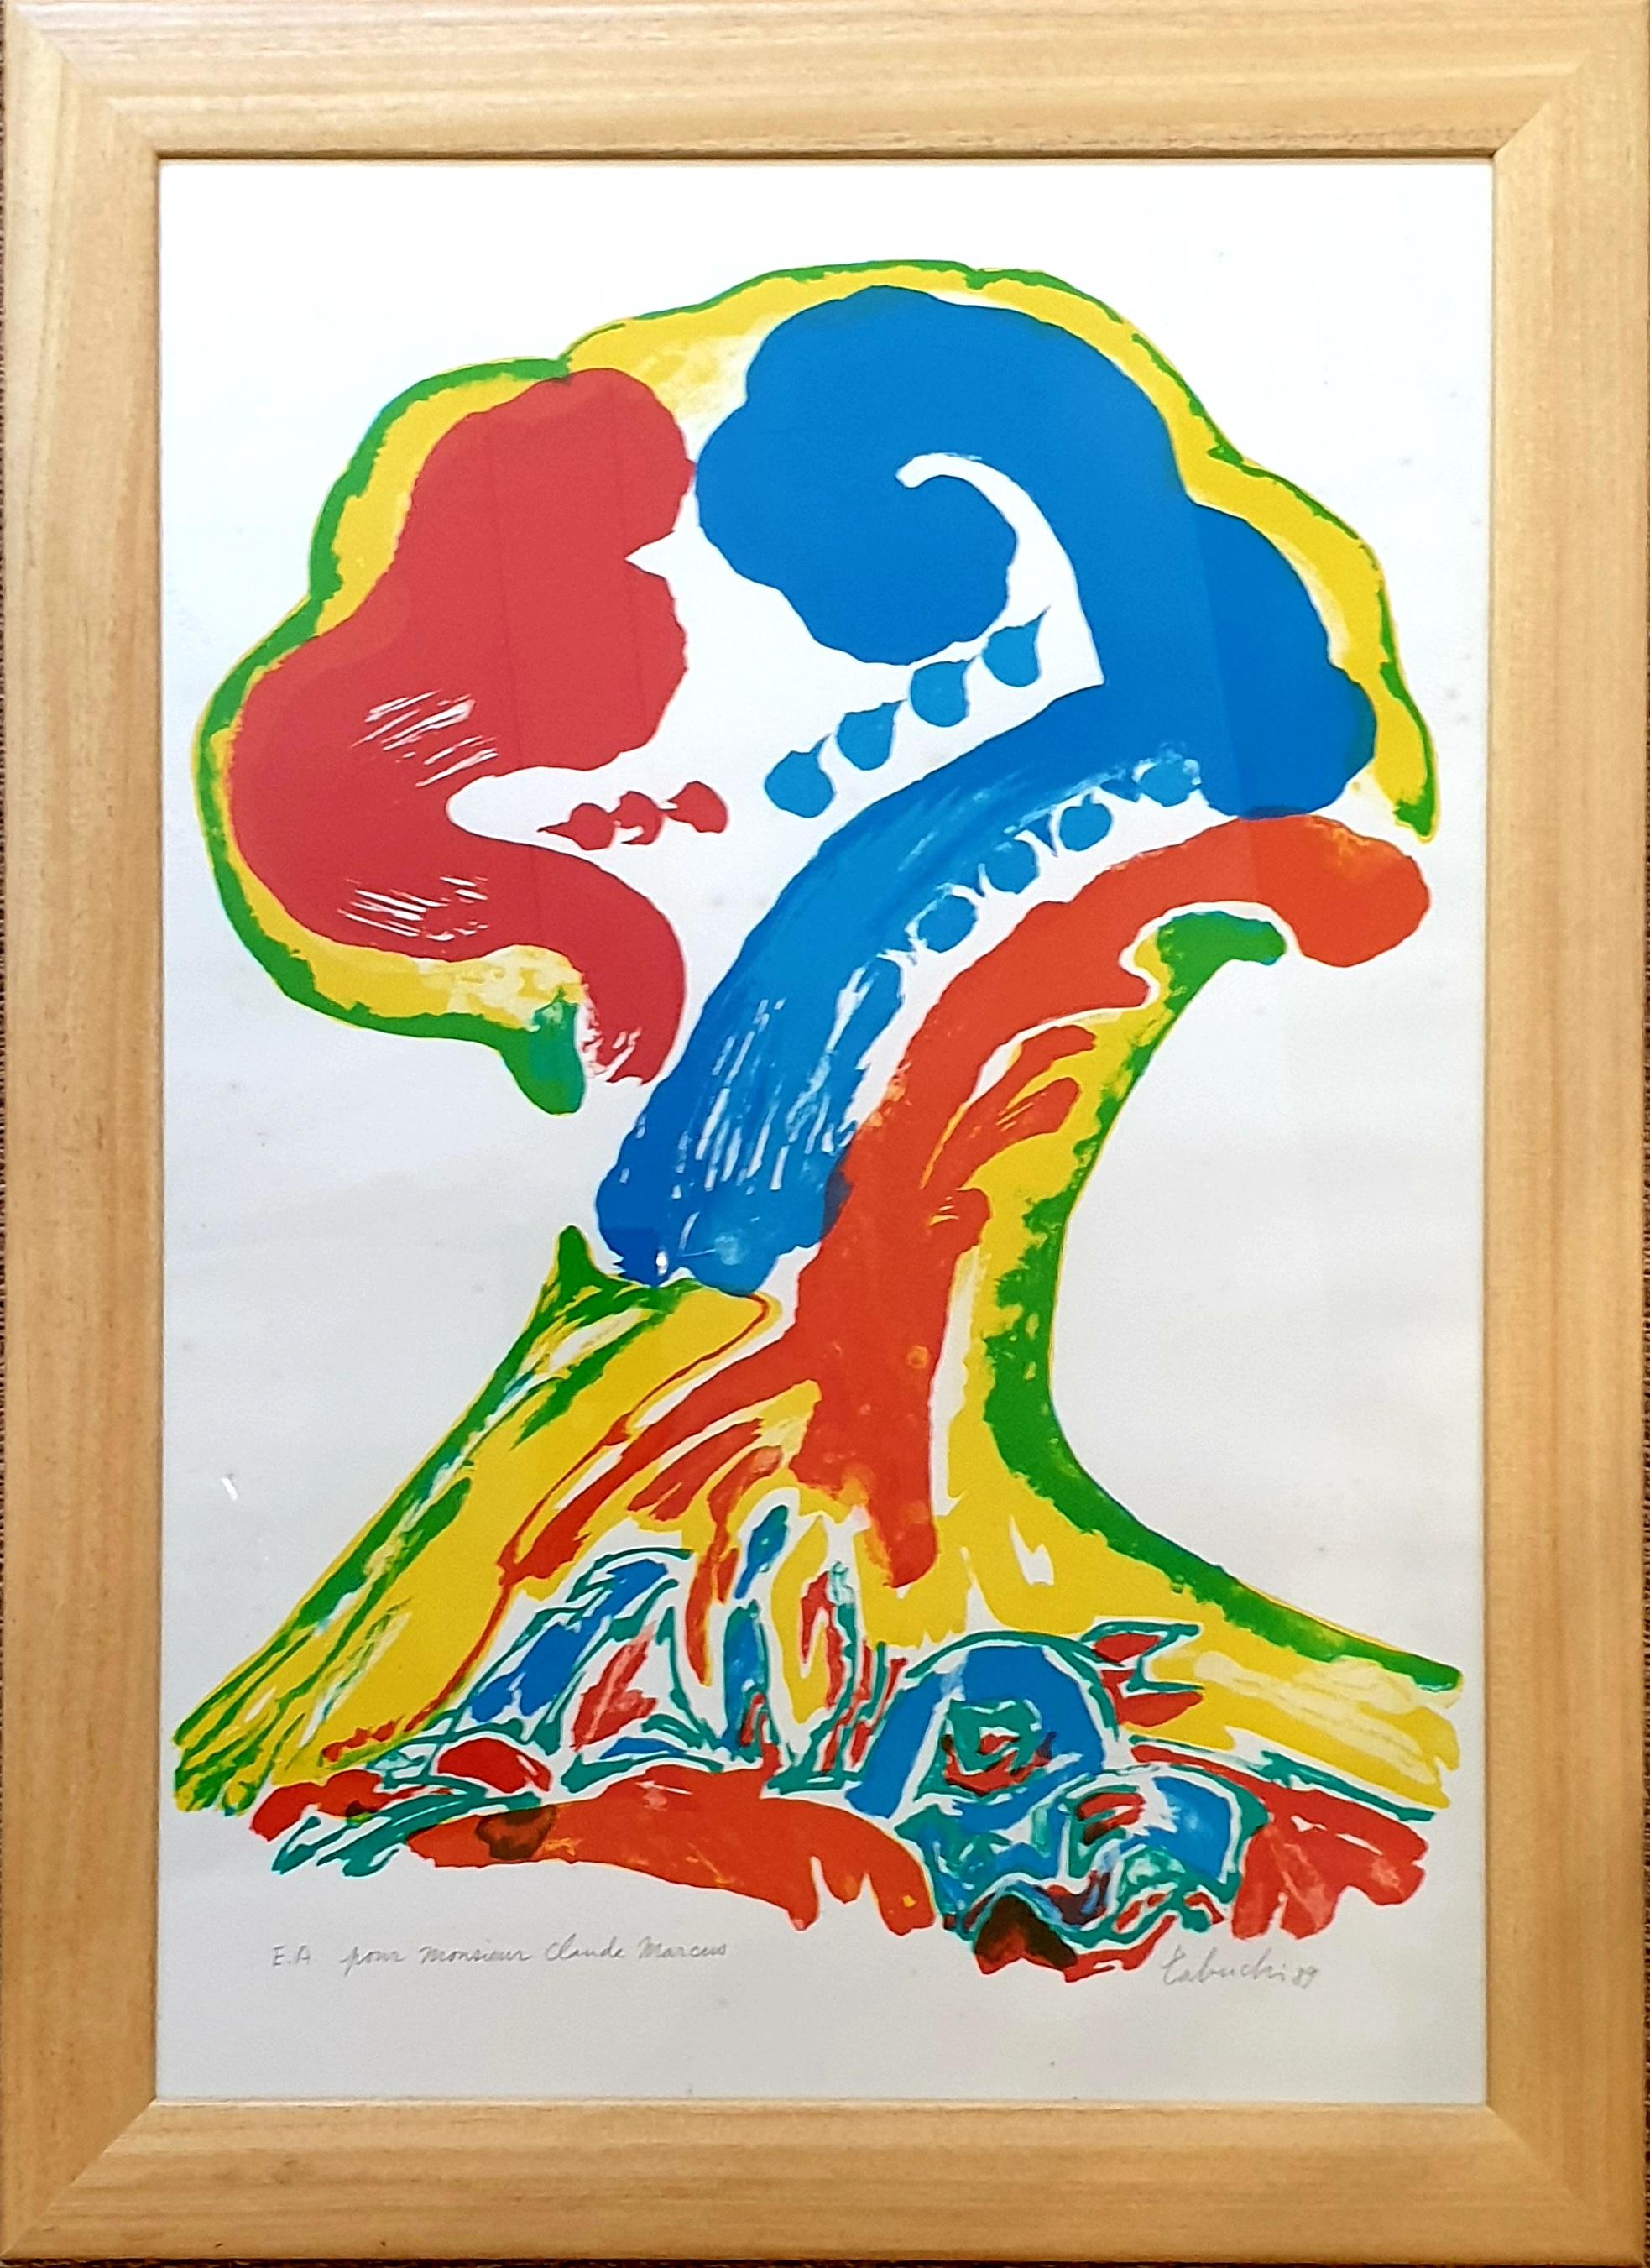  Yasse Tabuchi Abstract Print - The Tree of Life, Signed Artists Copy